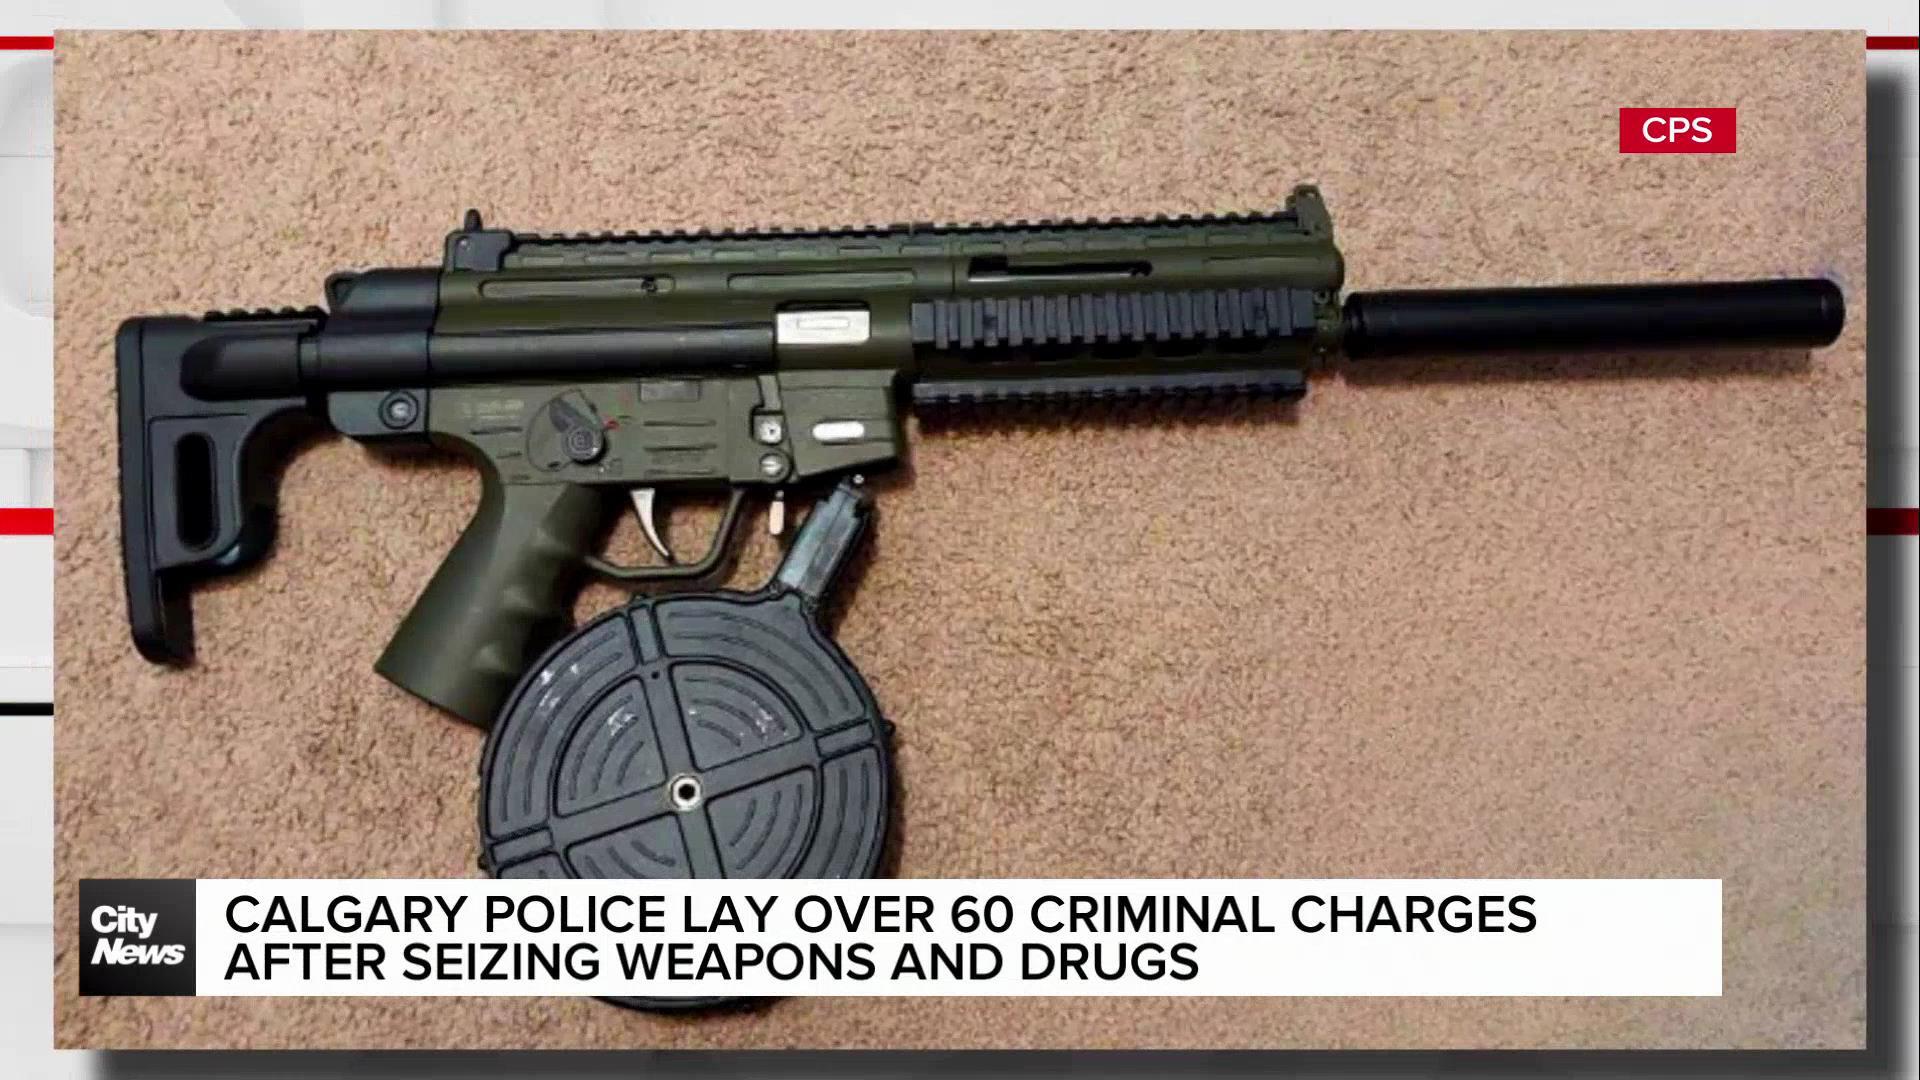 Calgary police lay over 60 charges after weapons and drugs seizure